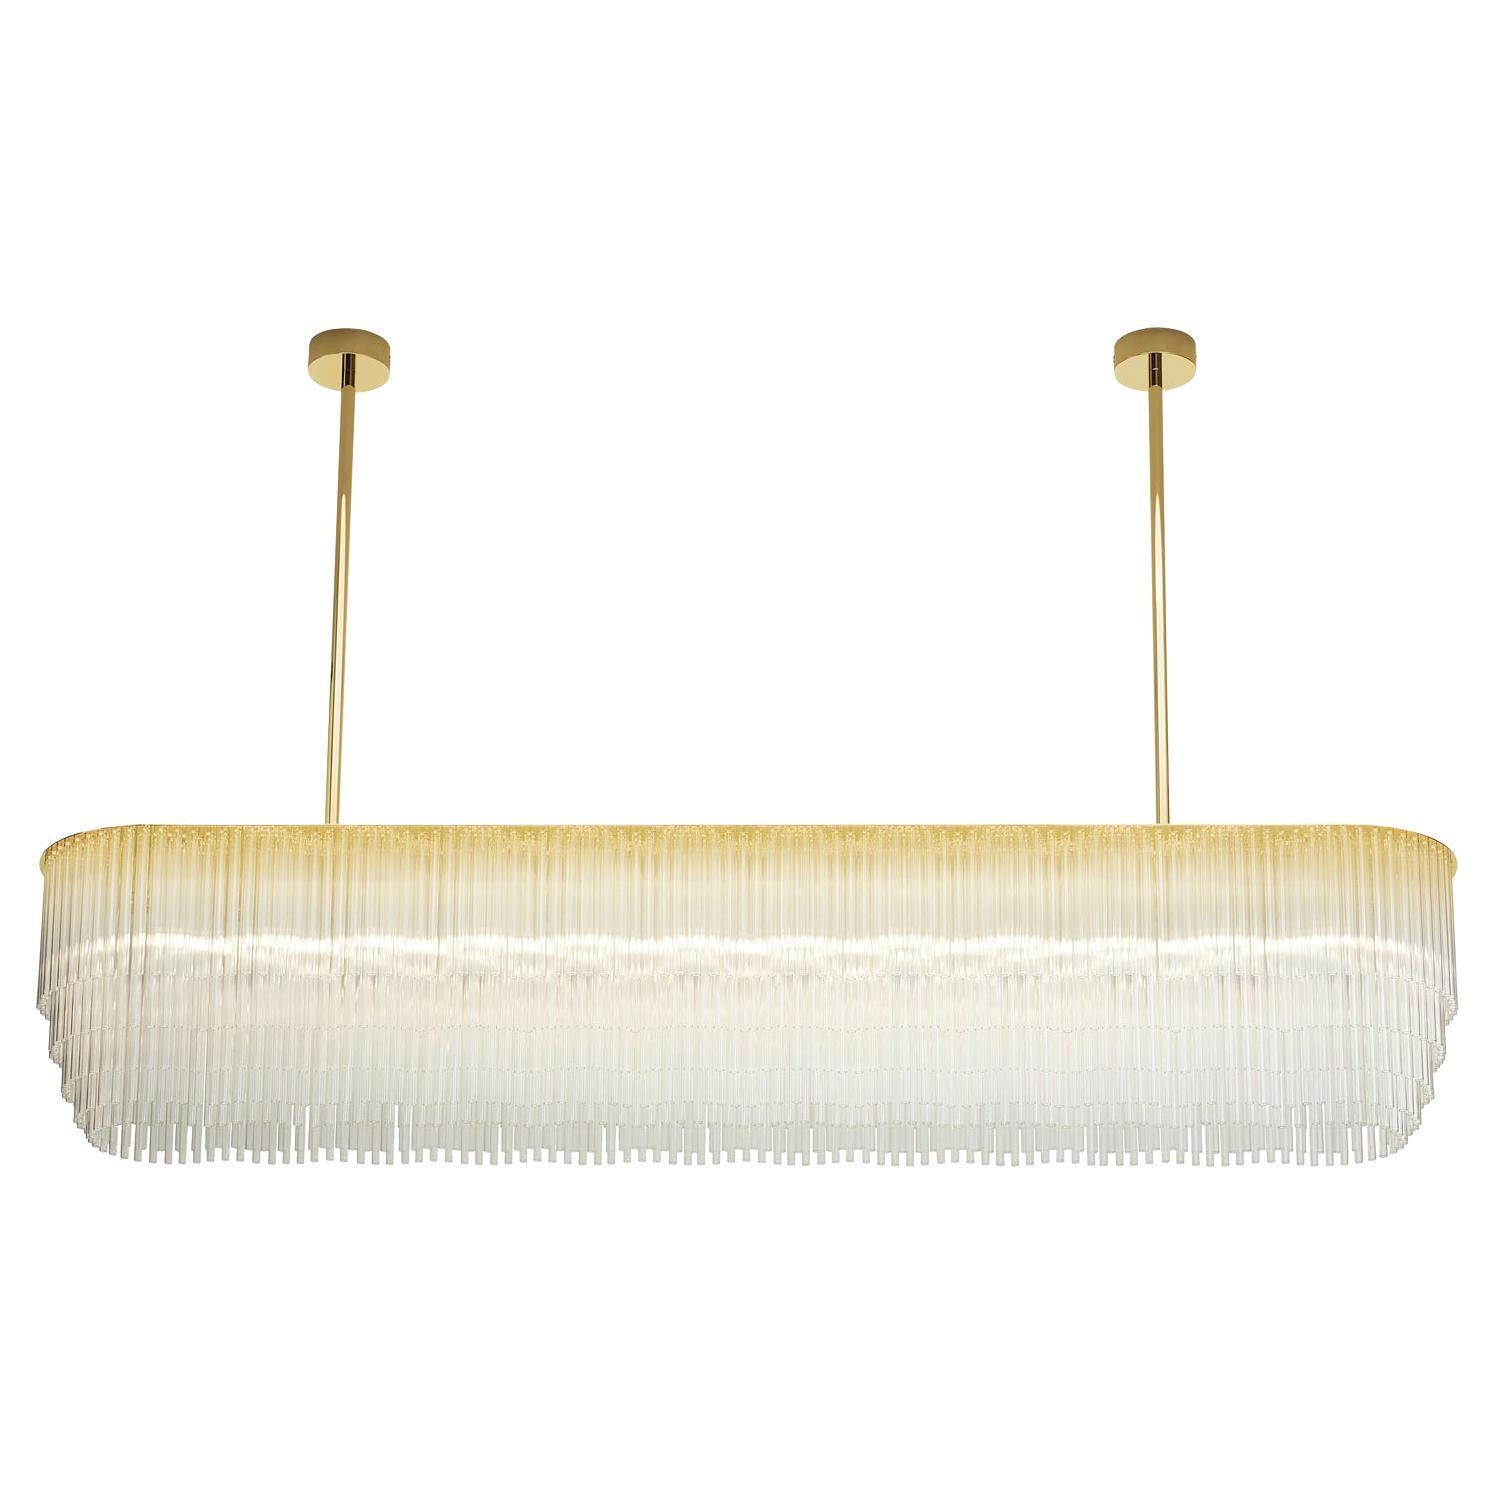 Linear Chandelier 1915mm / 75.25" in Polished Brass with Tiered Glass Profile For Sale